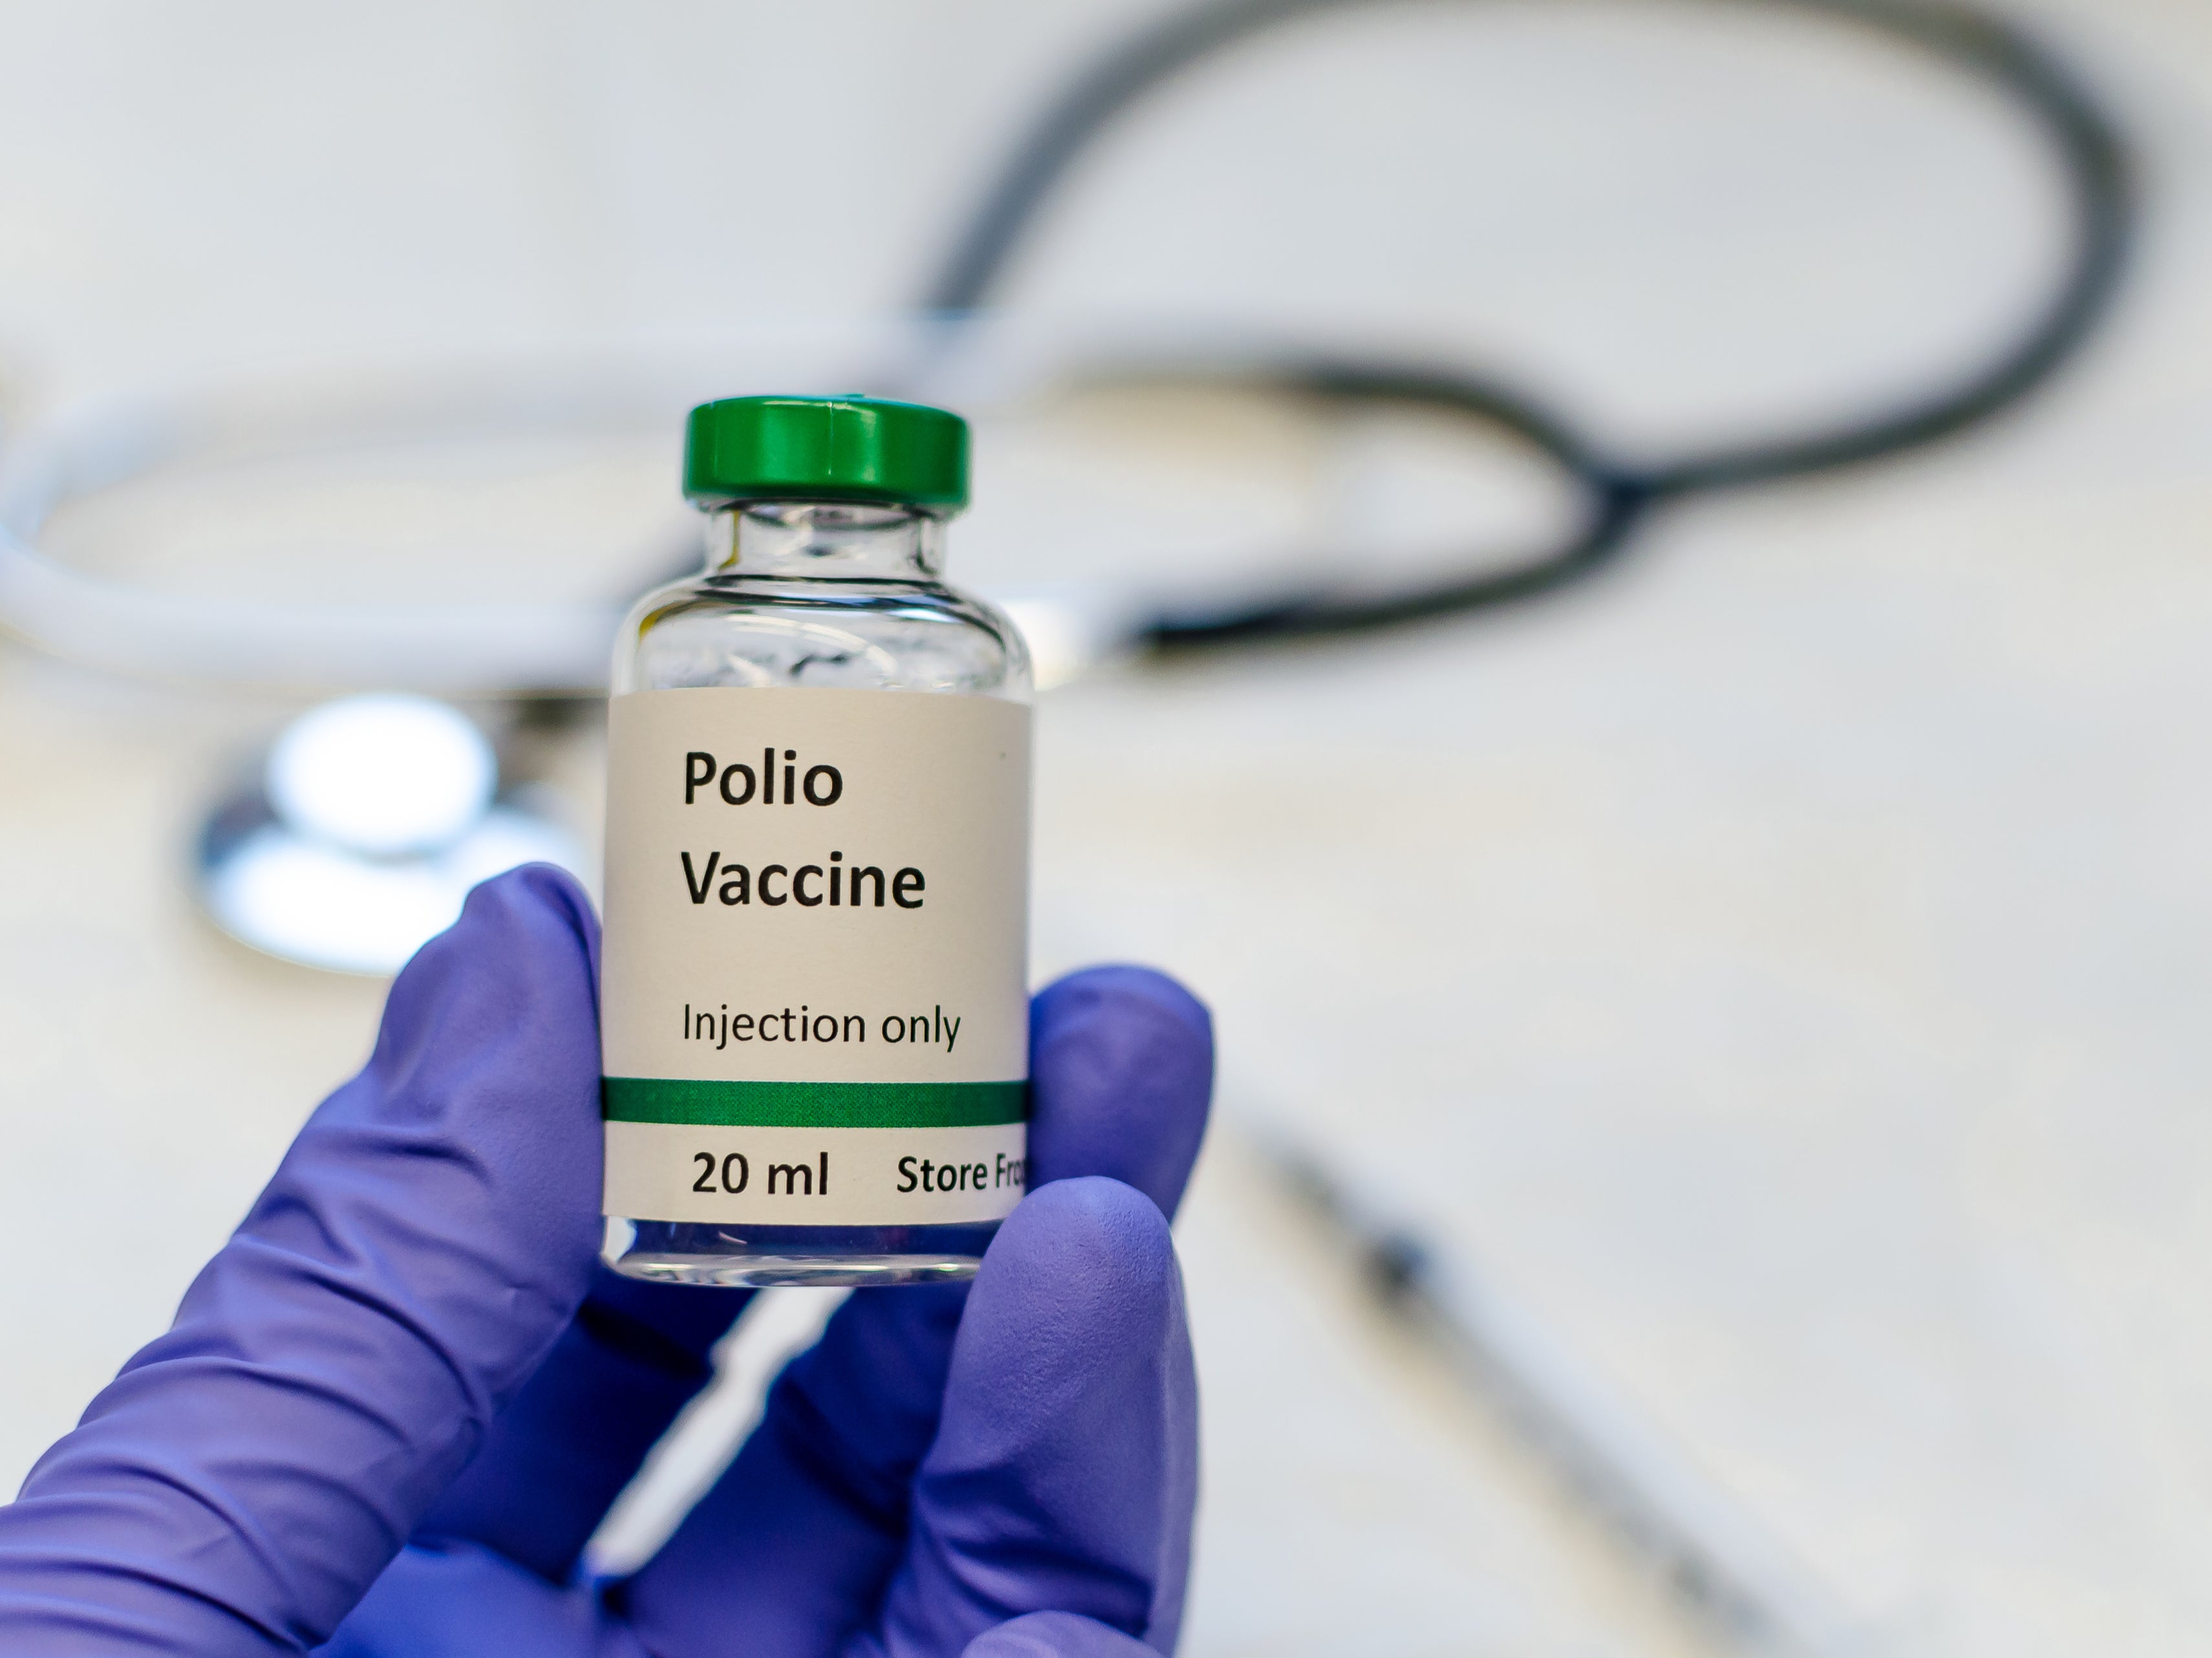 Polio vaccination rates have fallen in recent years